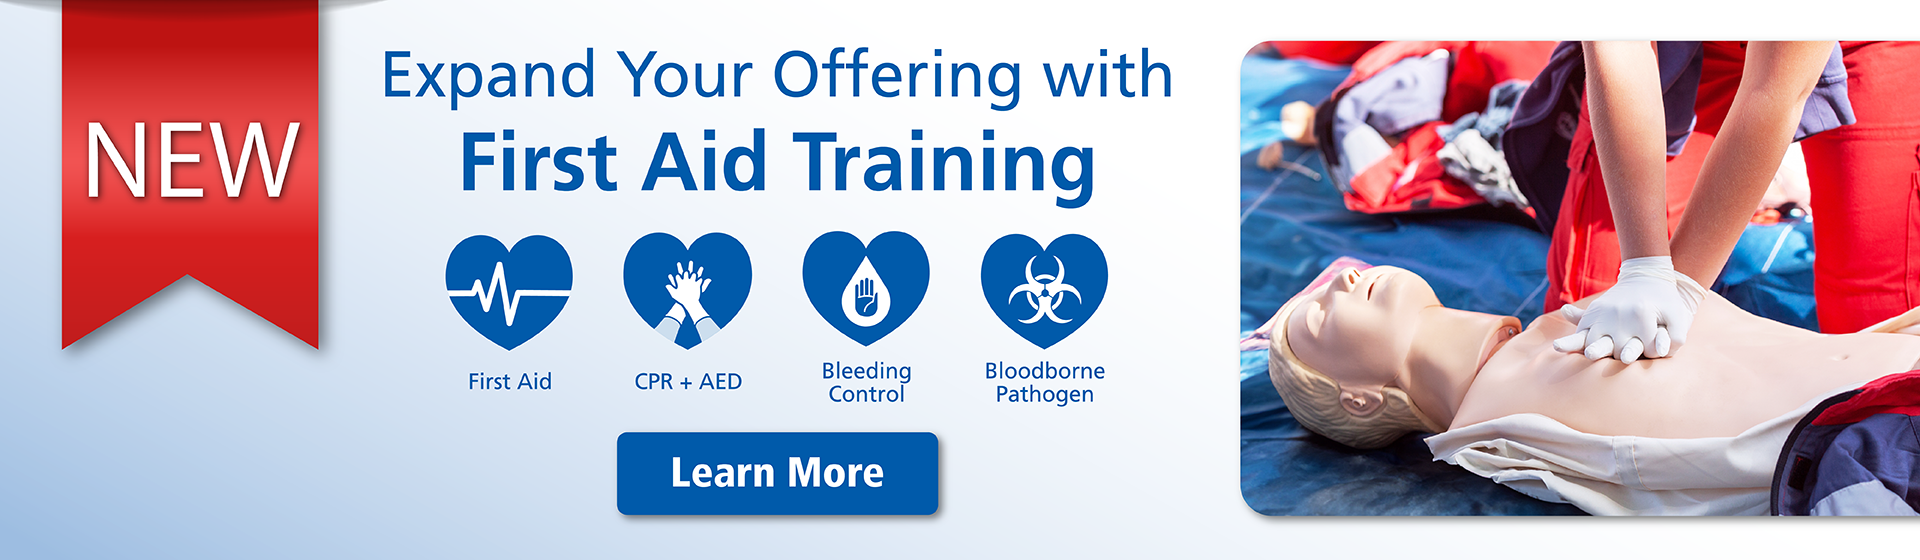 https://d38zcepchip0tz.cloudfront.net/media/wysiwyg/firstaidonly/6431-BAFAO_January_First-Aid-Training-Campaign_Web-Banner.png